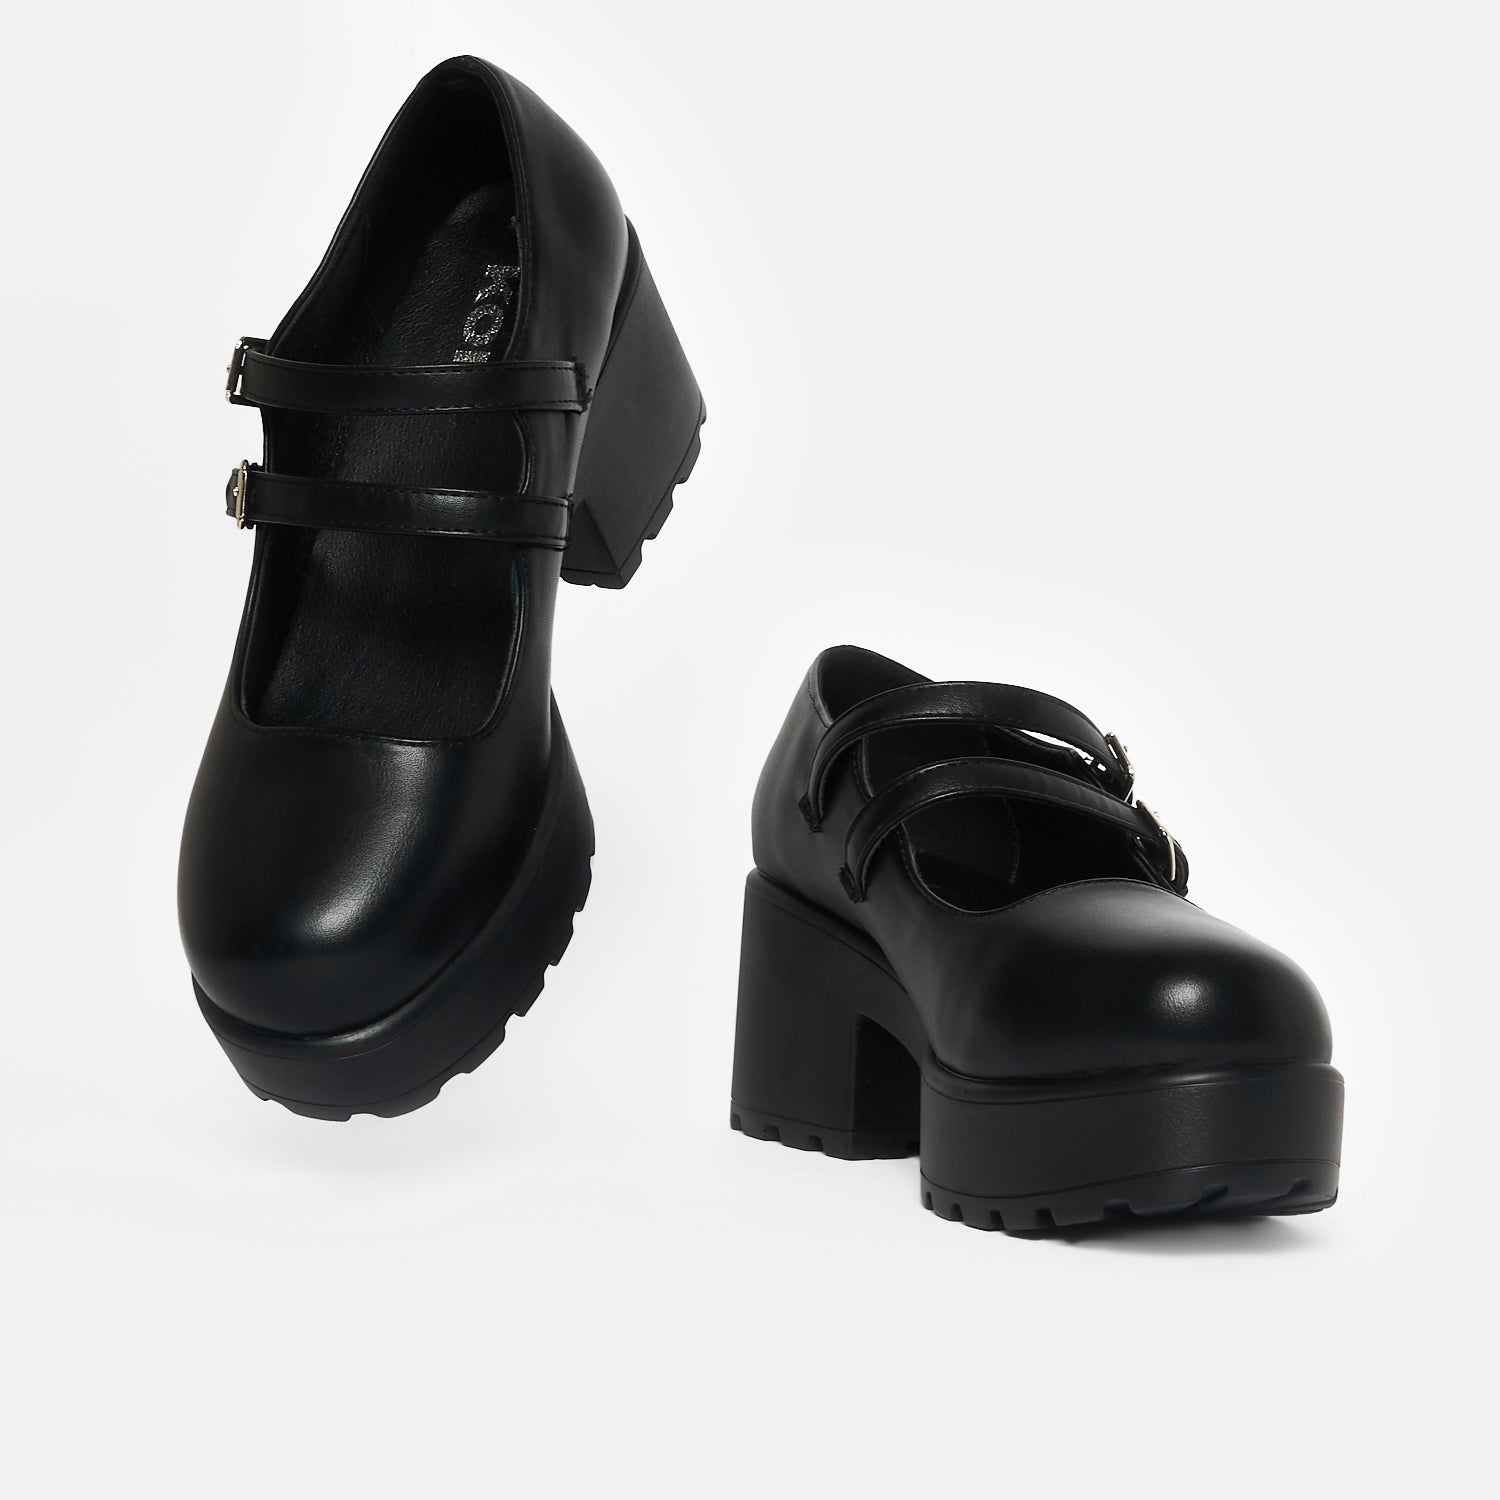 Mura Double Strap Shoes - Mary Janes - KOI Footwear - Black - Top and Front View